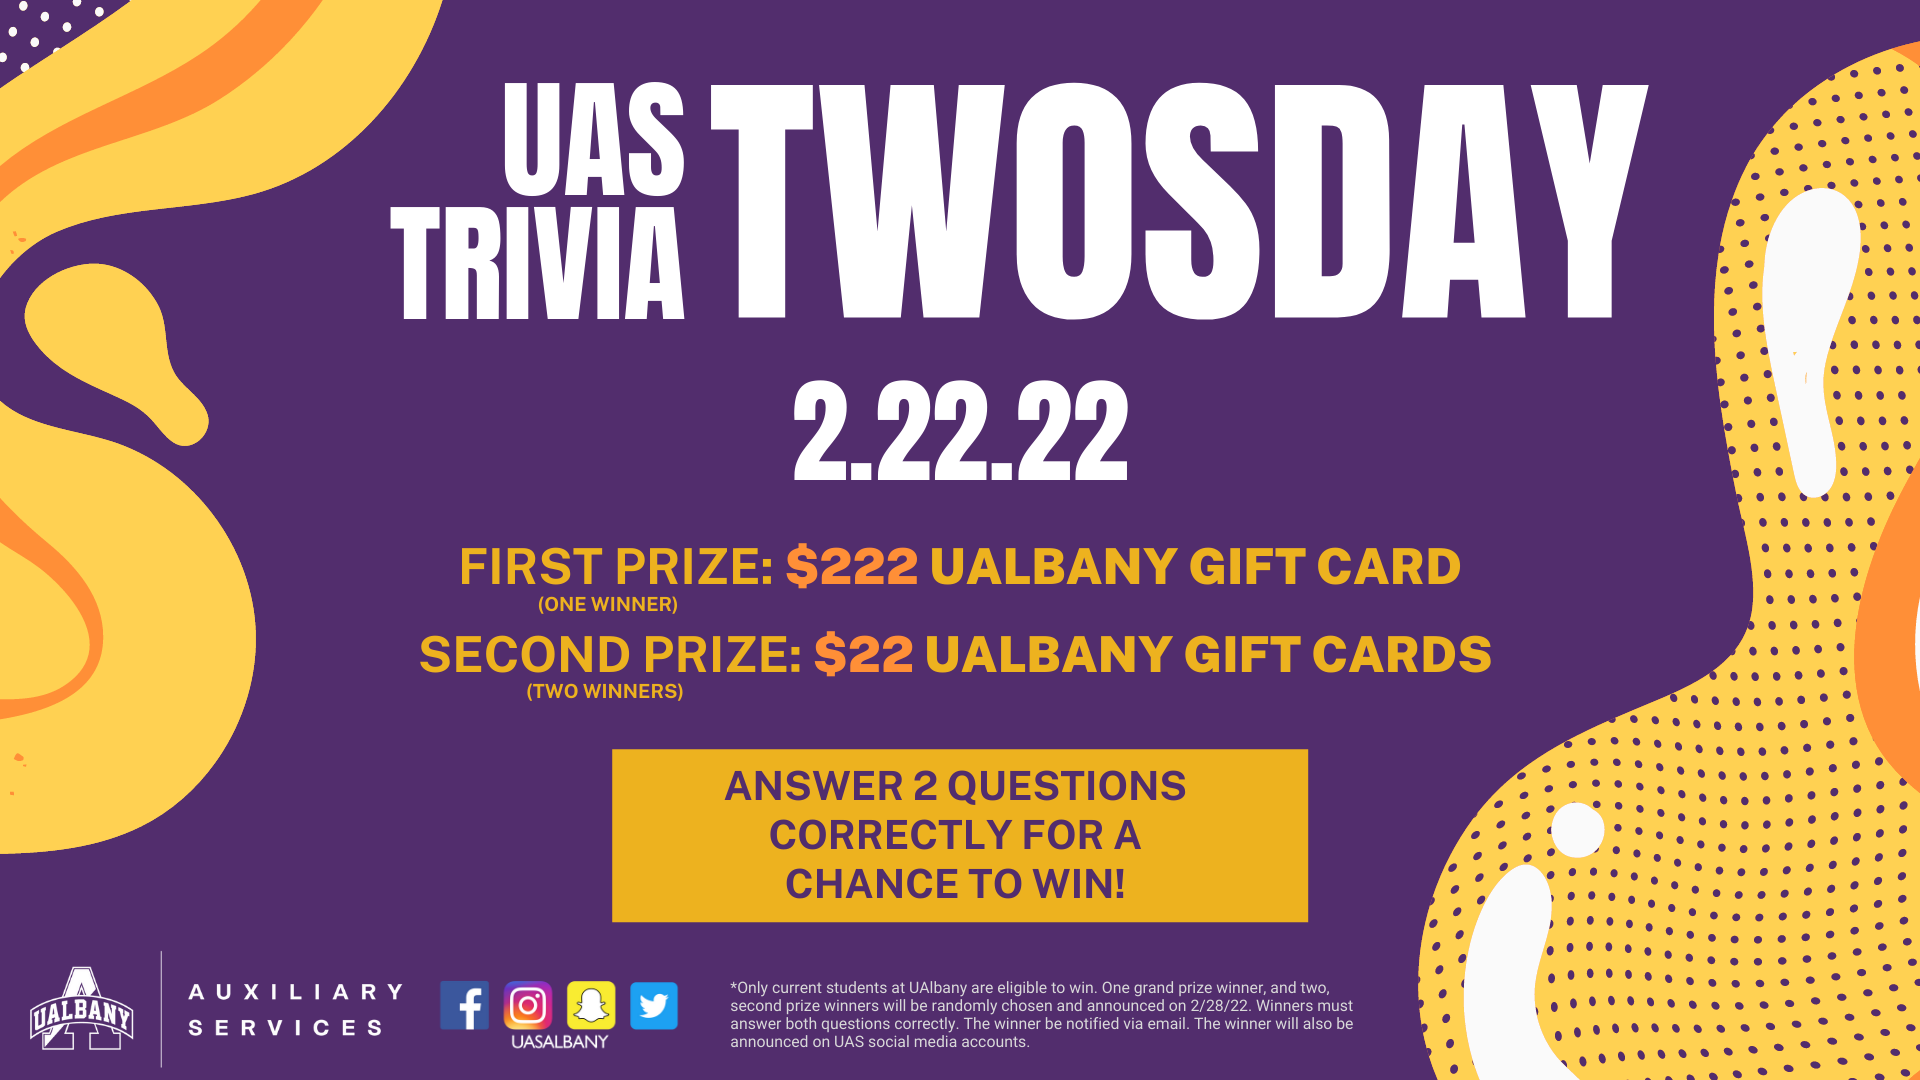 Bold text in white on purple background: UAS Trivia TWOSDAY. 2.22.22. Gold text on purple background: First prize, one winner: win $222 UAlbany gift card. Second prize, two winners: win $22 UAlbany gift cards. Purple text in gold rectangle box: Answer 2 questions  correctly for a chance to win! *Only current students at UAlbany are eligible to win. One grand prize winner, and two, second prize winners will be randomly chosen and announced on 2/28/22. Winners must answer both questions correctly. The winner be notified via email. The winner will also be announced on UAS social media accounts. White UAS Albany A logo. Auxiliary Services. Text on 